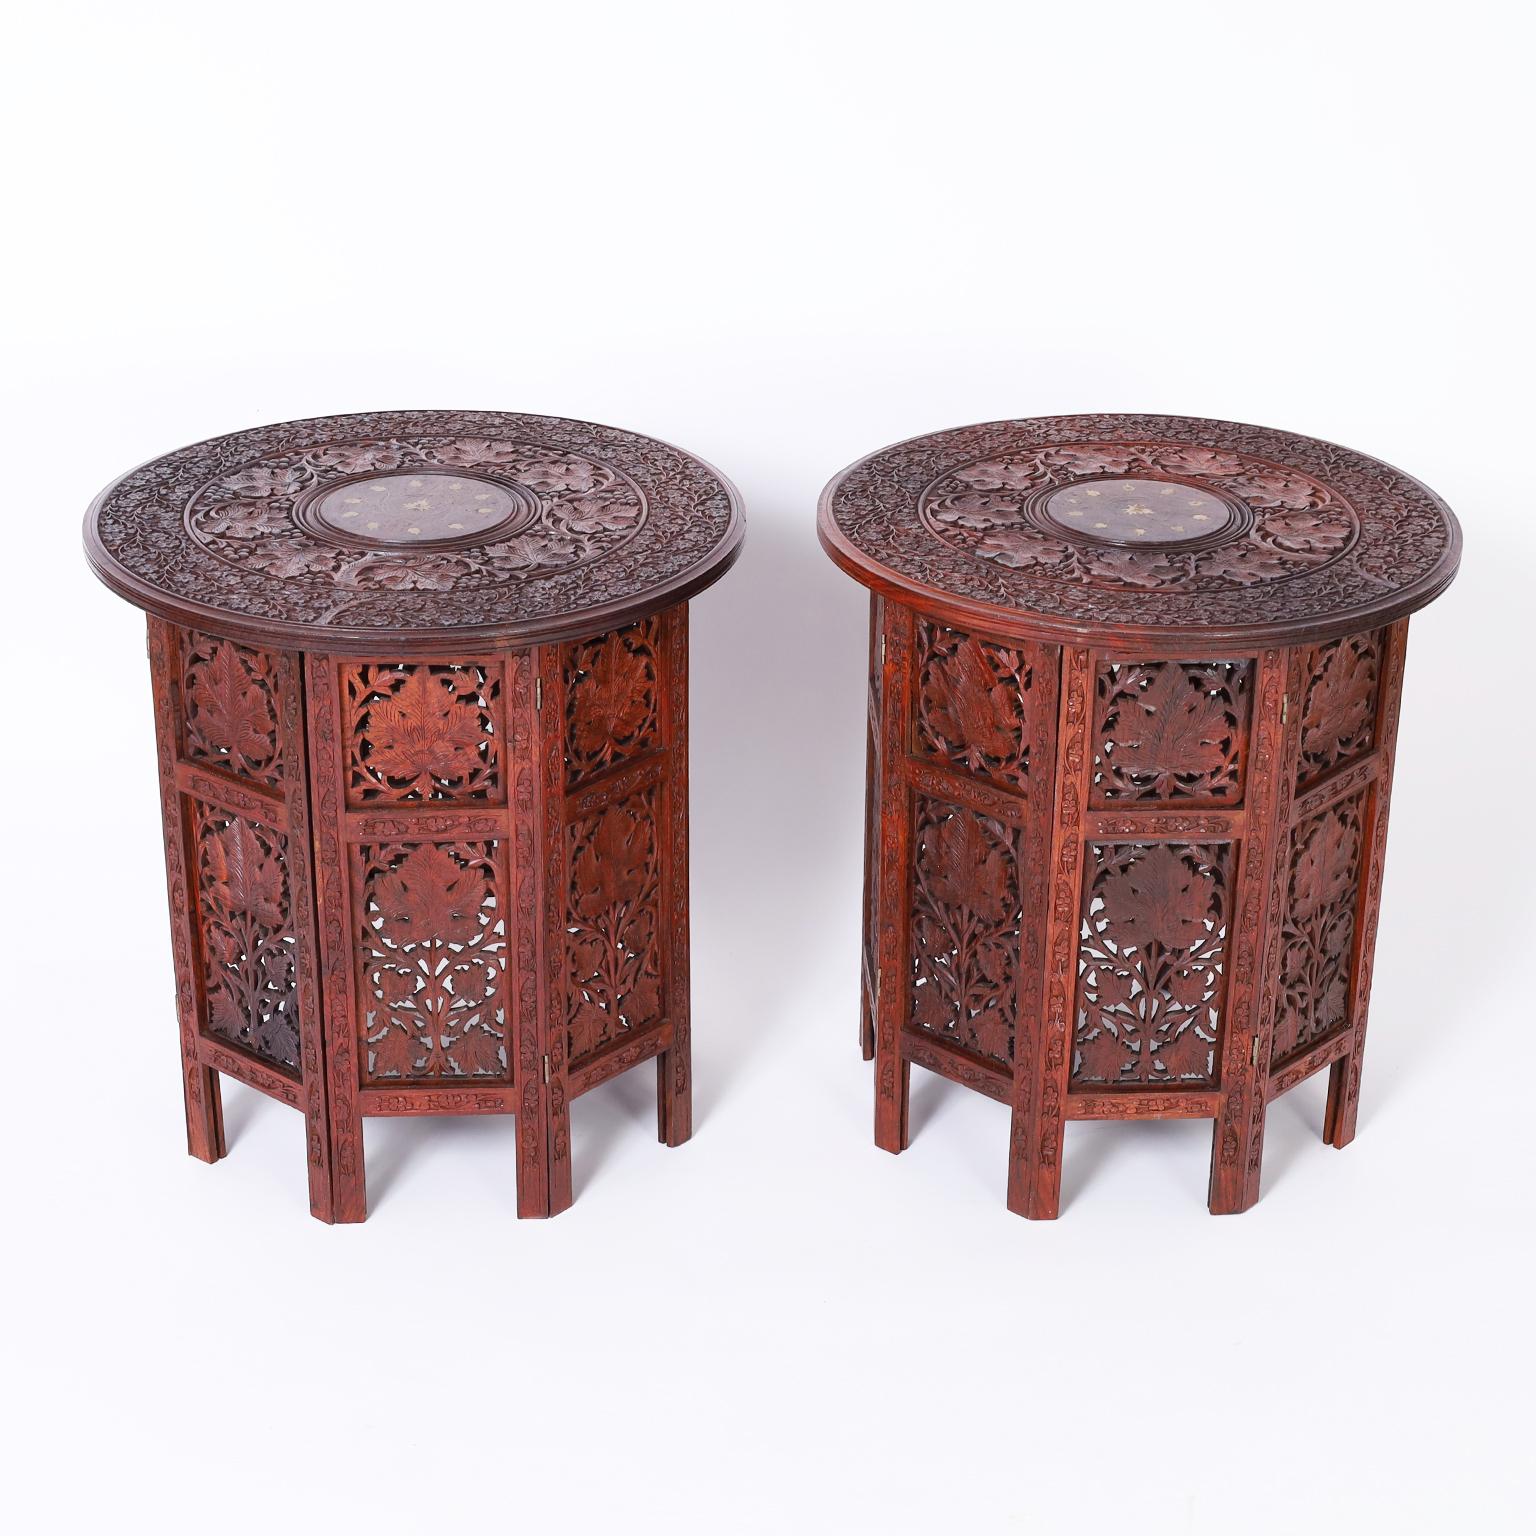 Pair of Anglo Indian stands crafted in mahogany with round tops having a center medallion with floral brass inlays surrounded by leaf carvings. The octagon bases have floral carvings with open fretwork.